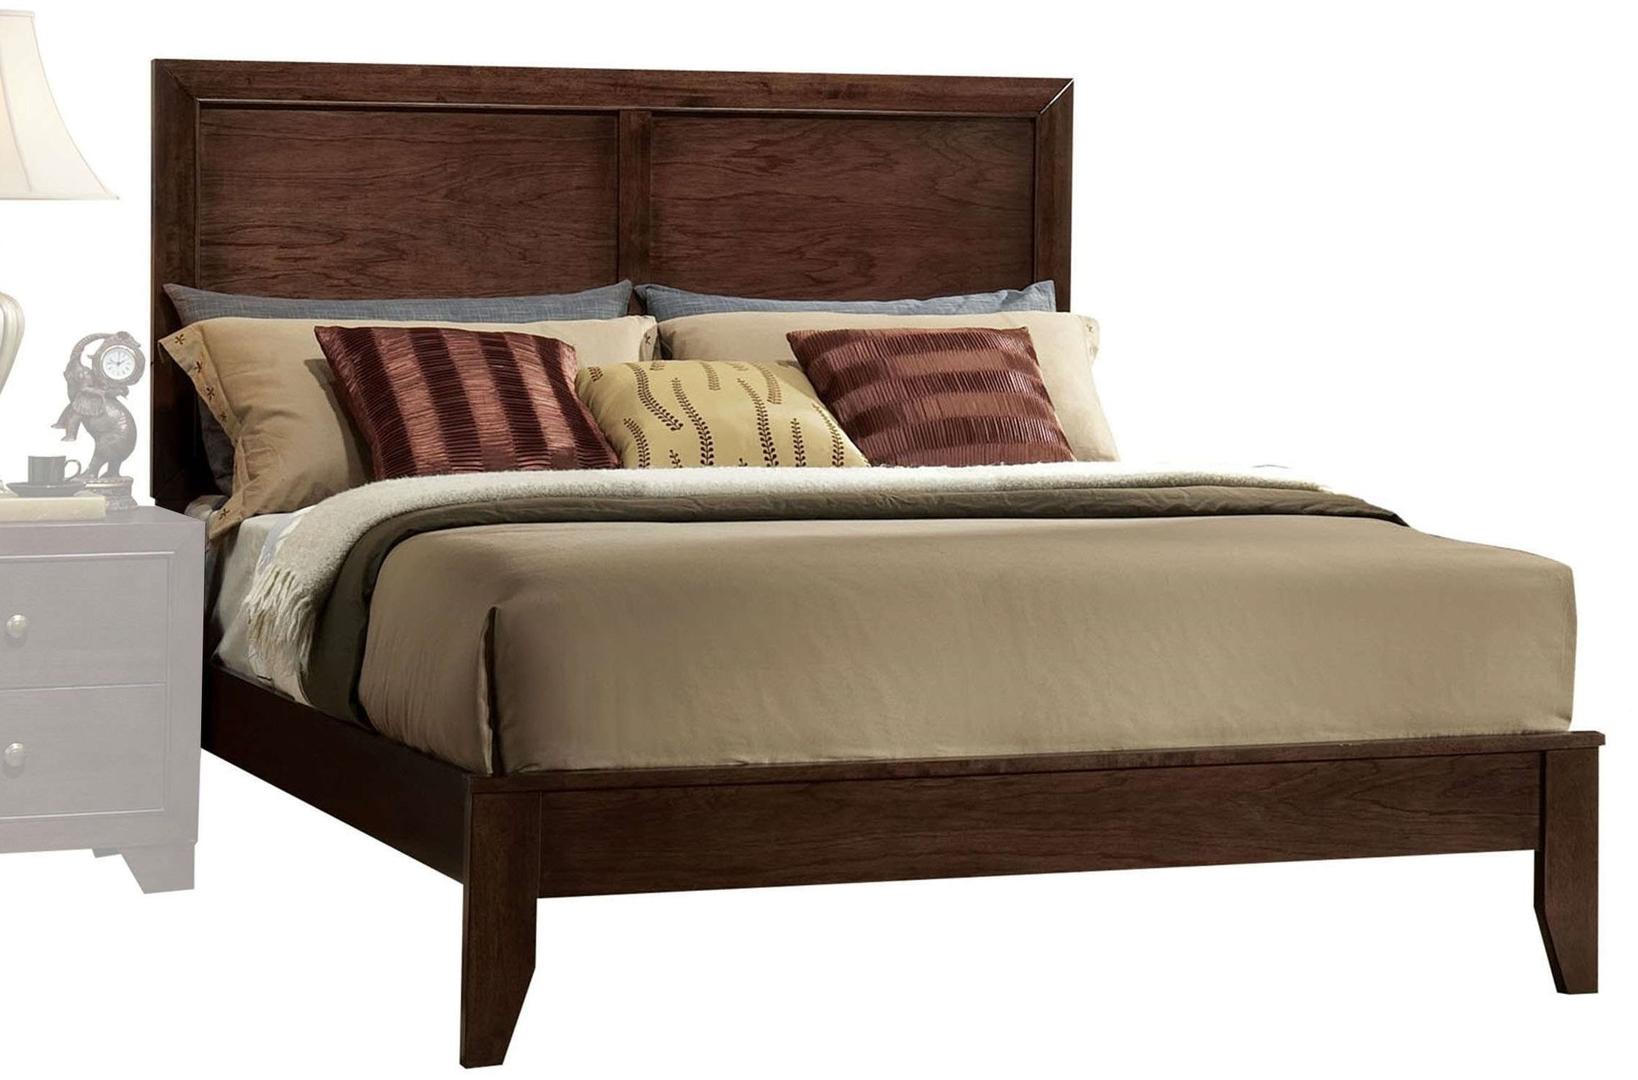 90' X 76' X 52' Espresso Rubber and Tropical Wood California King Bed